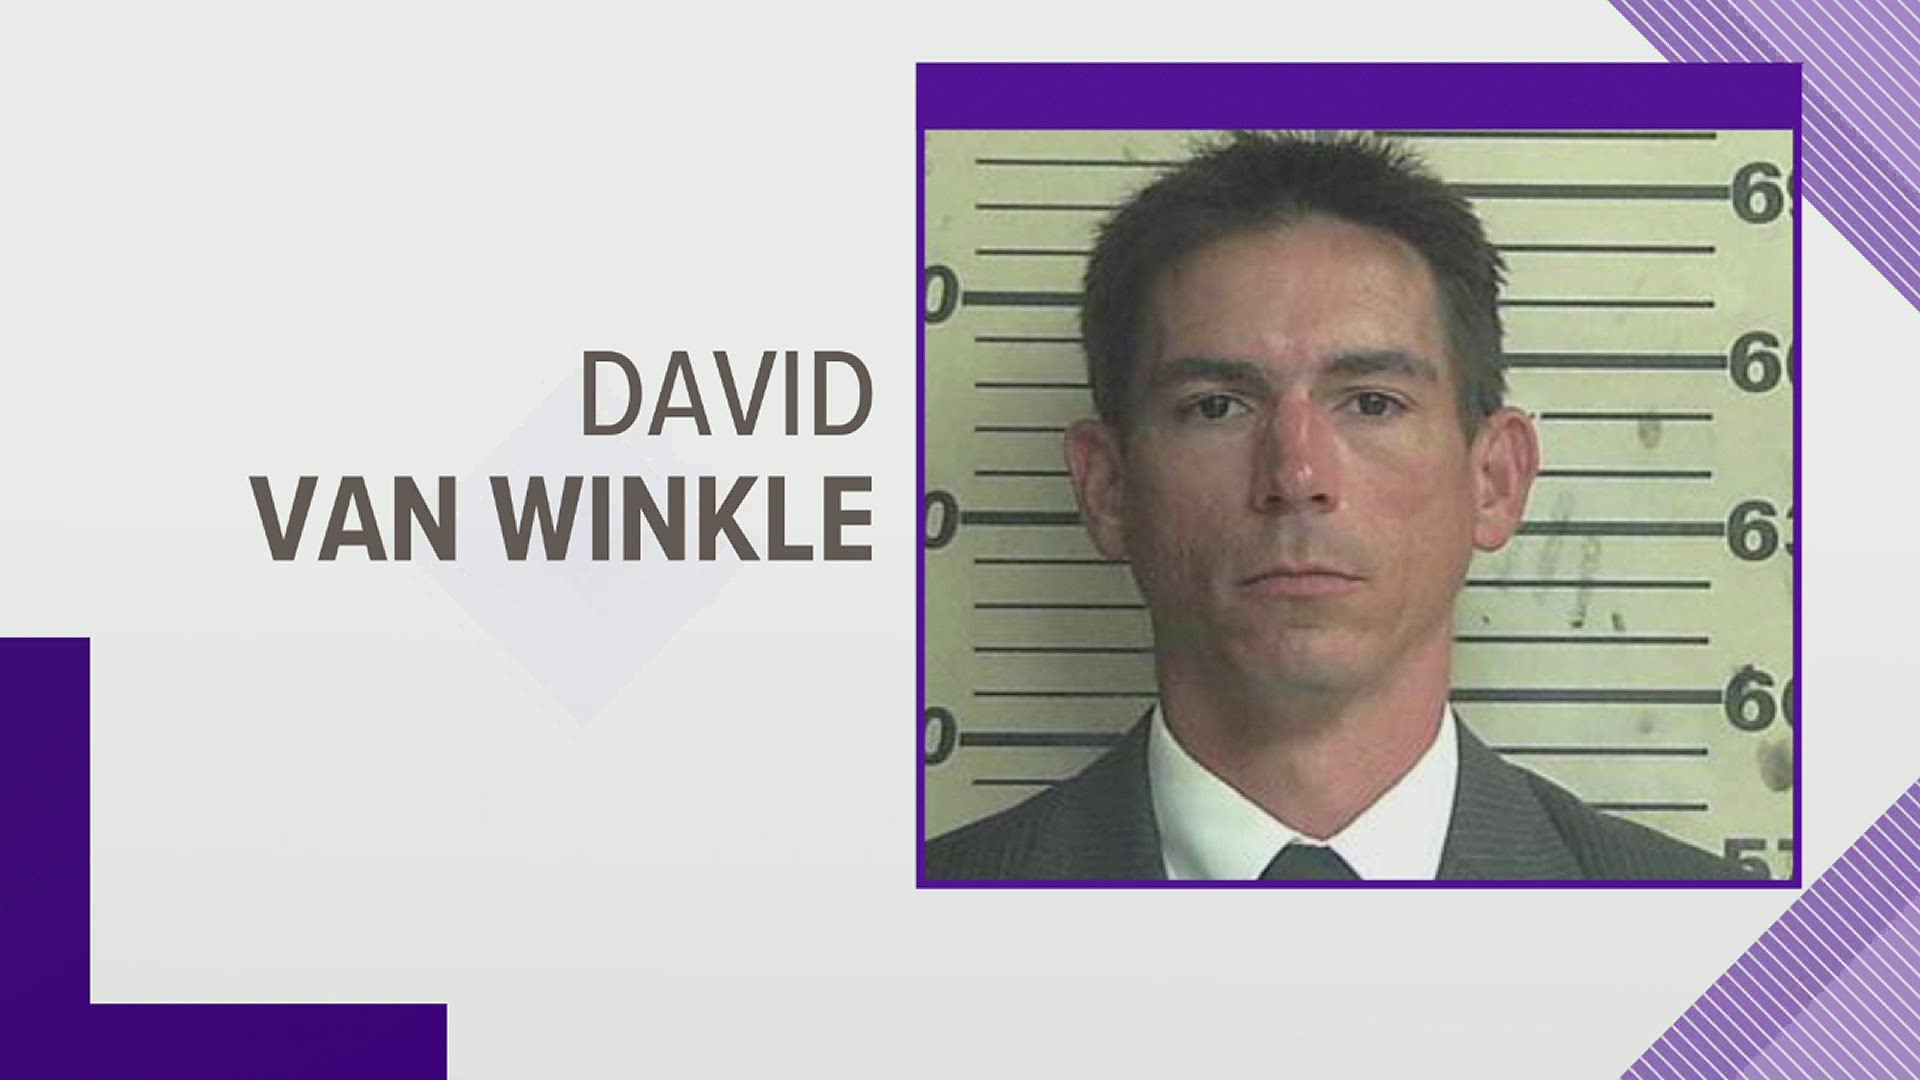 David Van Winkle entered the plea on June 10, and has been sentenced to serve four years in prison in the shooting death of 47-year-old Dana Clark.